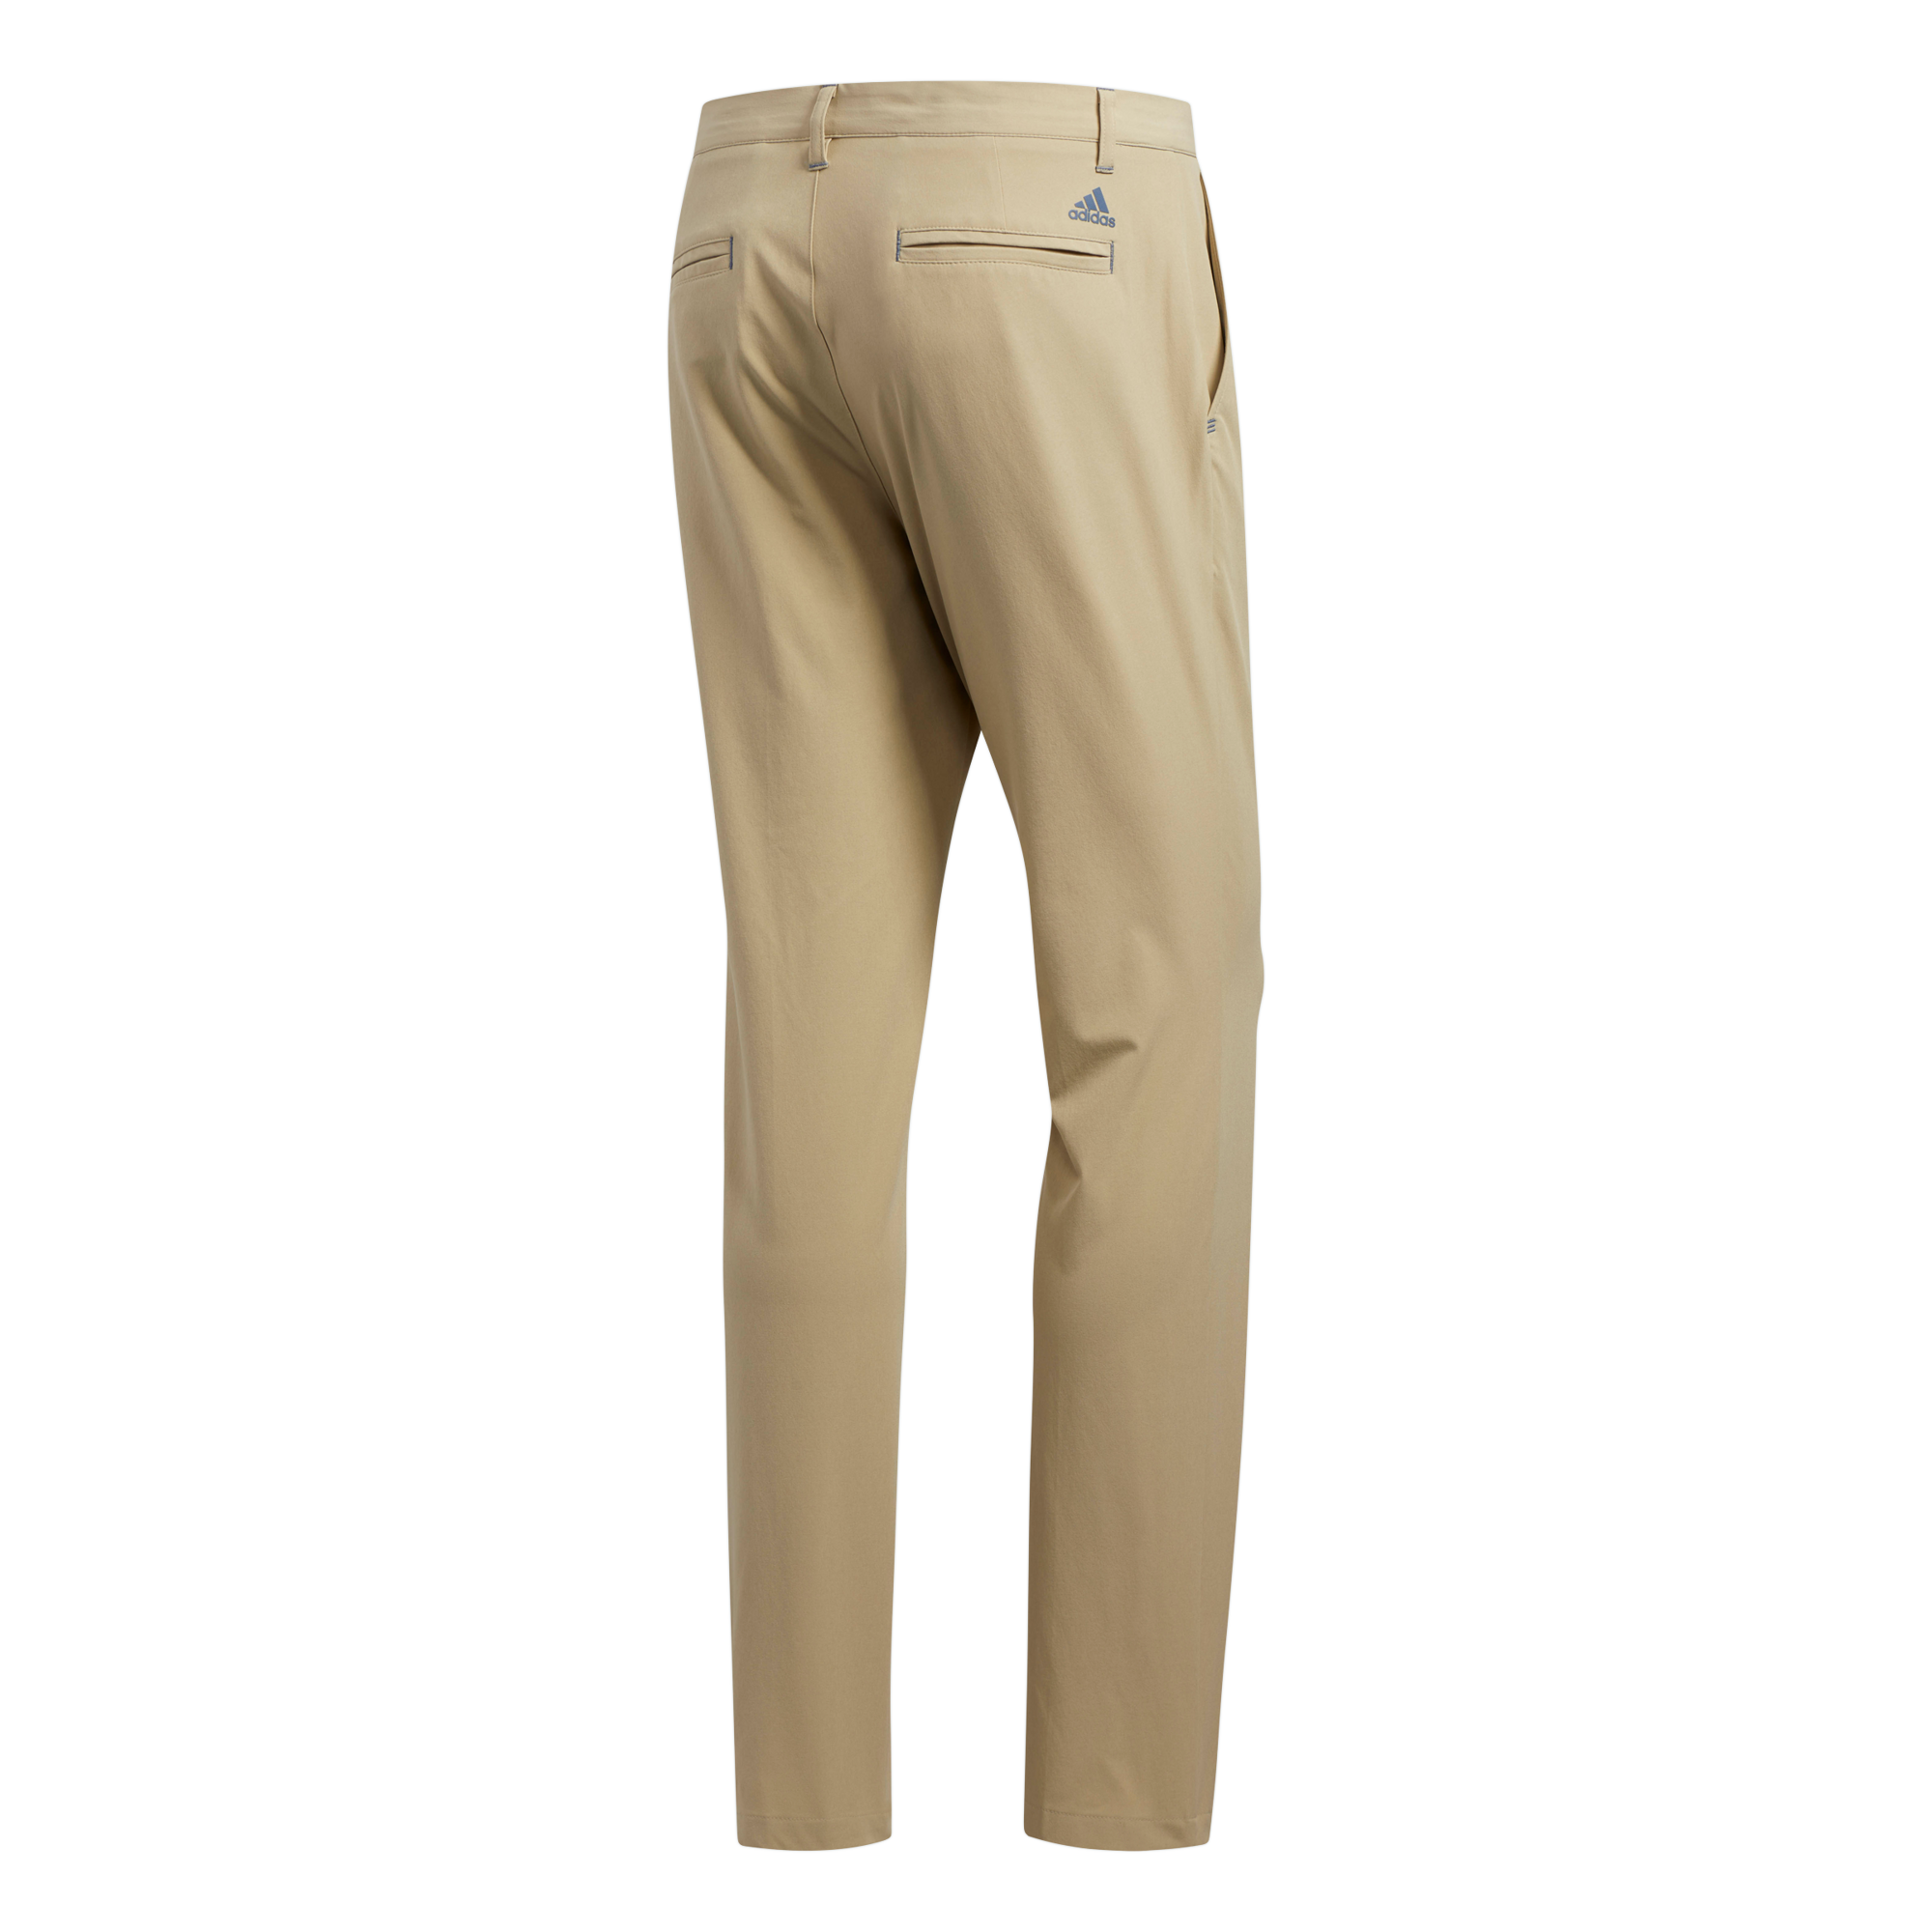 RAW GOLD "ULTIMATE' TAPERED GOLF TROUSER - MEN